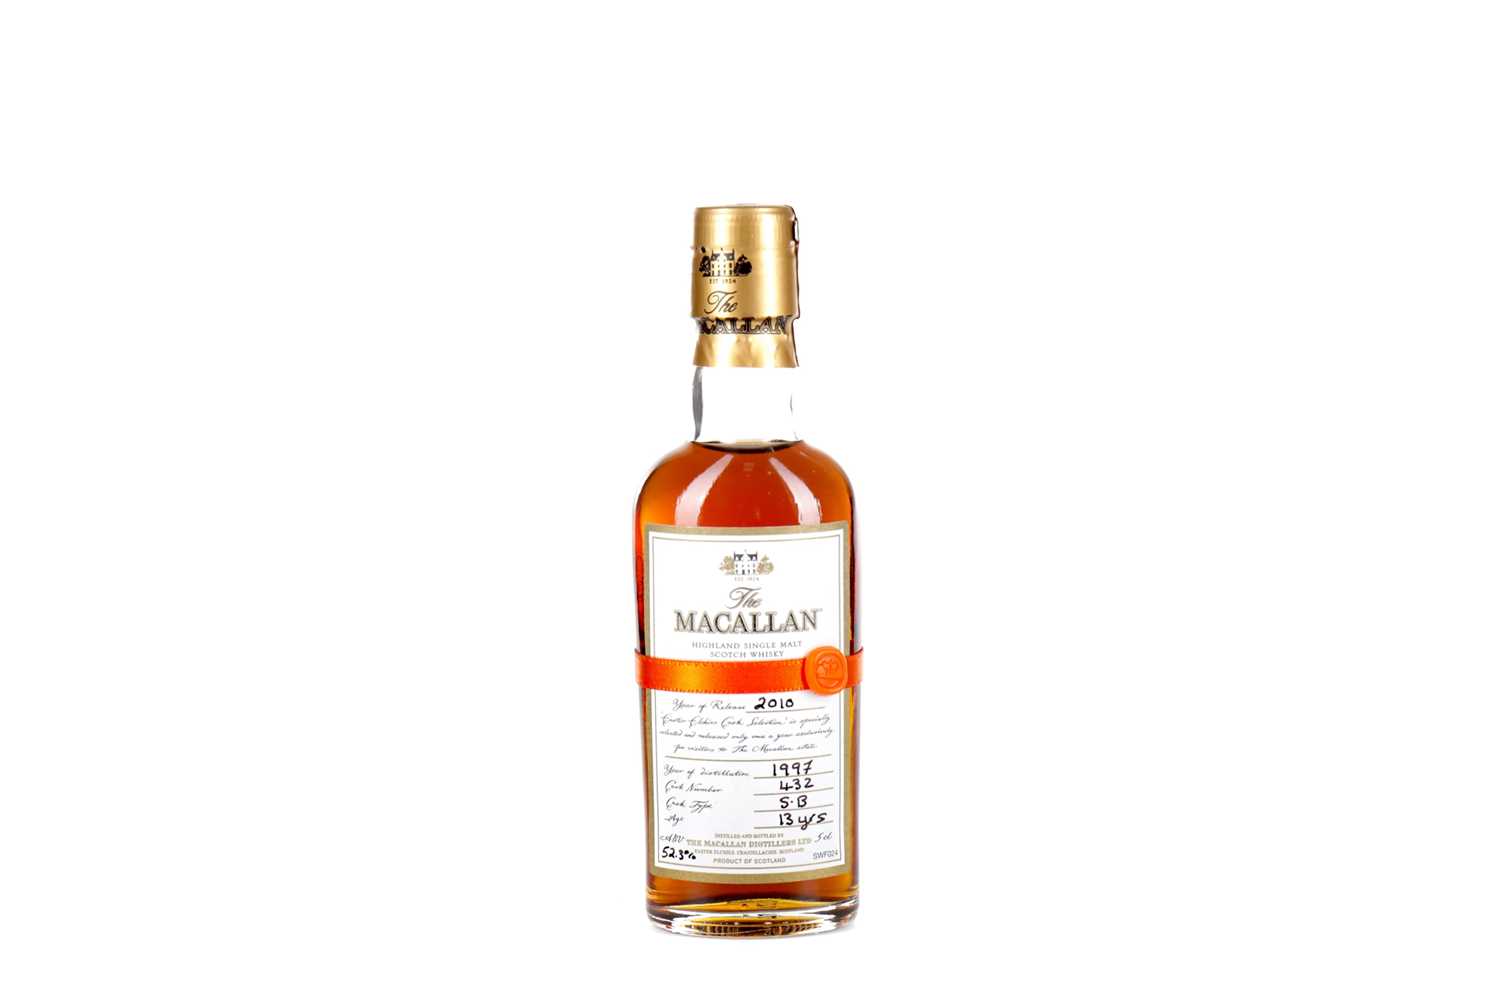 Lot 200 - MACALLAN 1997 EASTER ELCHIES 2010 RELEASE AGED 13 YEARS MINIATURE